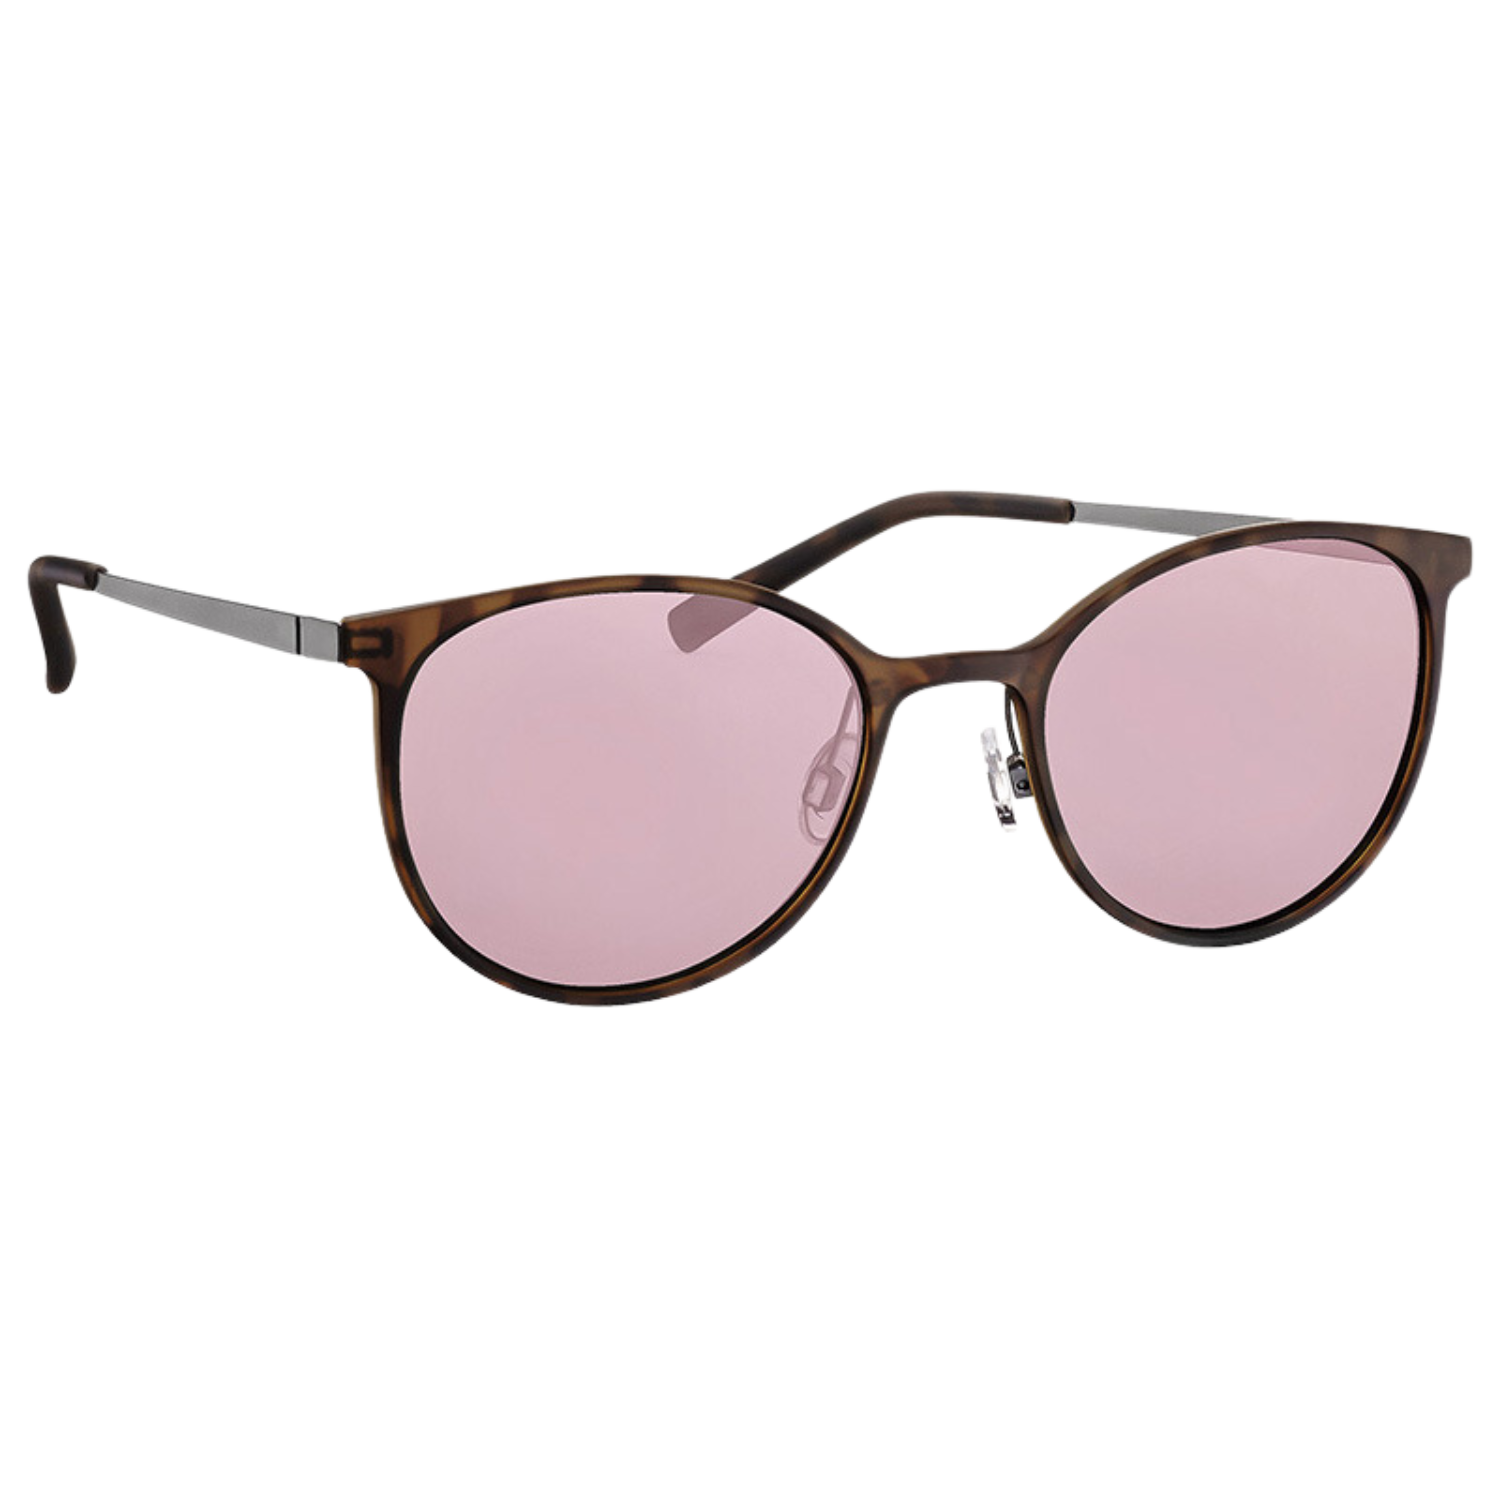 Image of the Acunis FL-41 Light Sensitivity Glasses with Brown Tortoise Acetate Frames and 25% tint lenses.